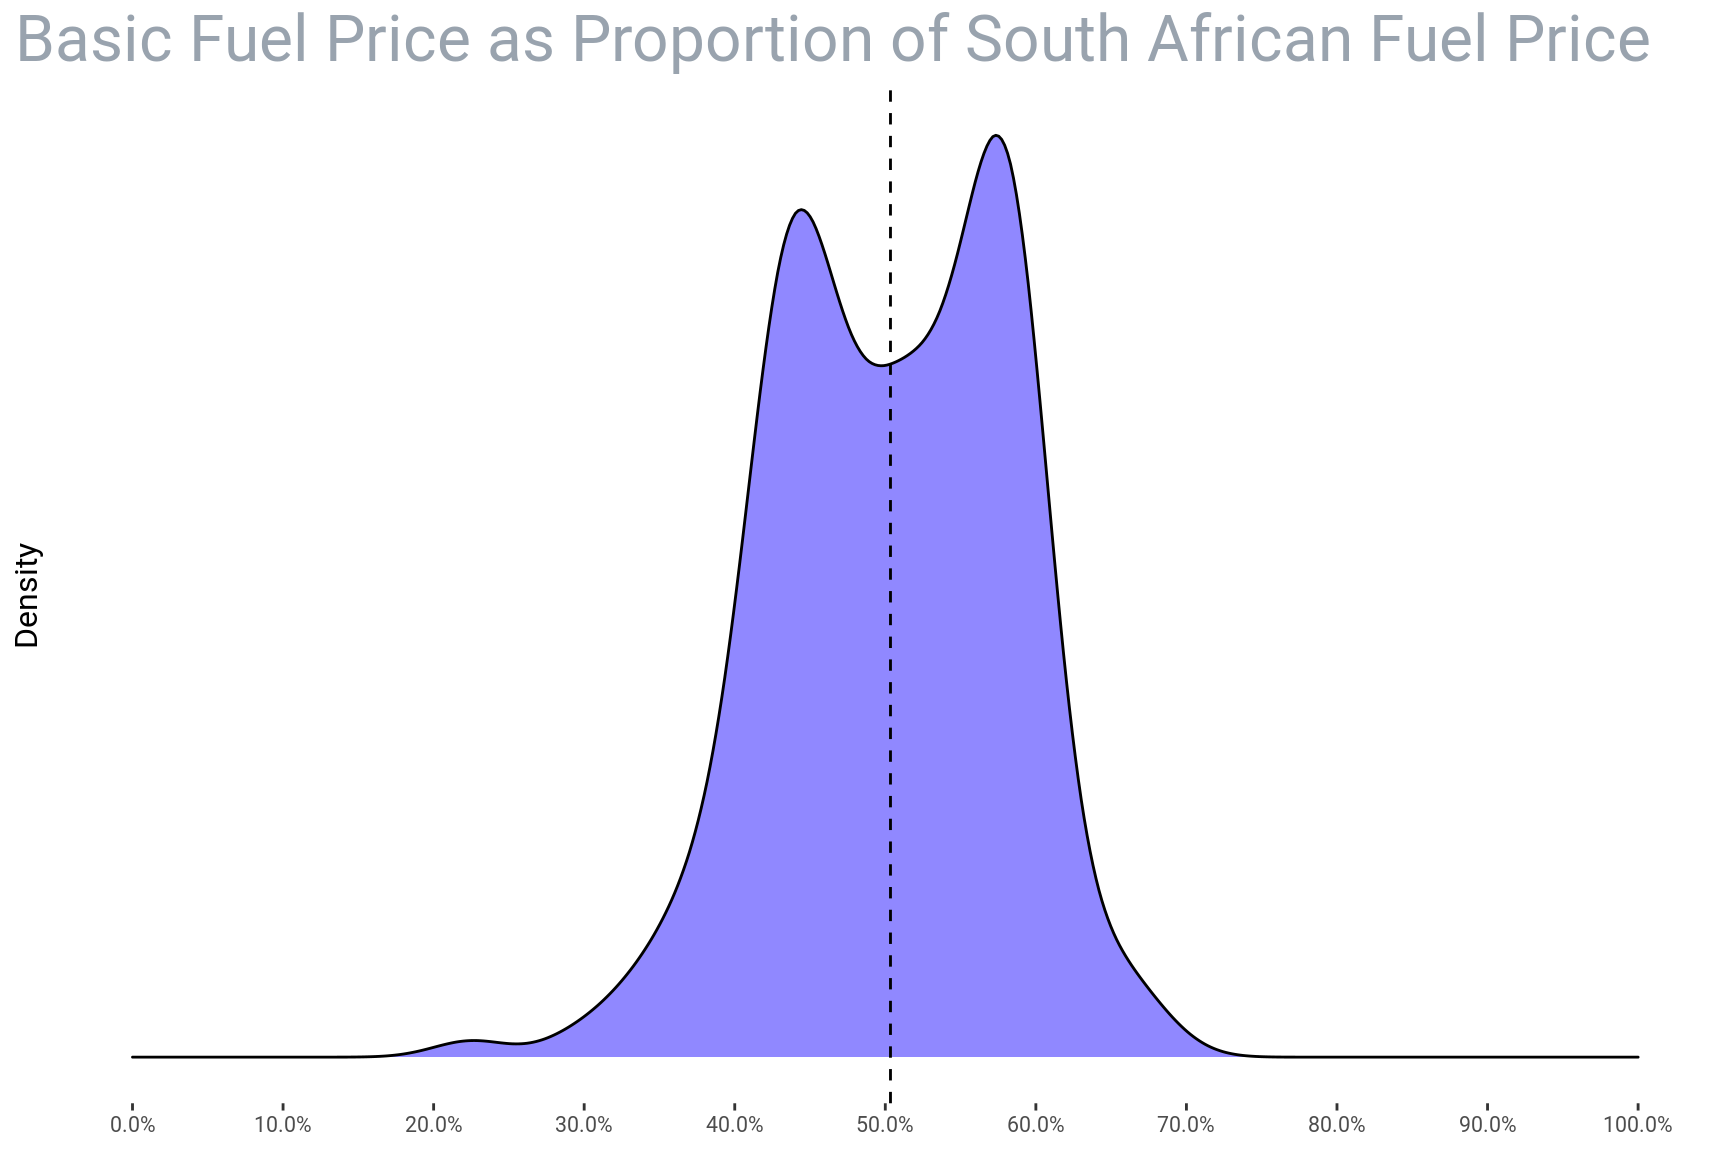 Distribution of the ratio of the basic fuel price to the total fuel price.